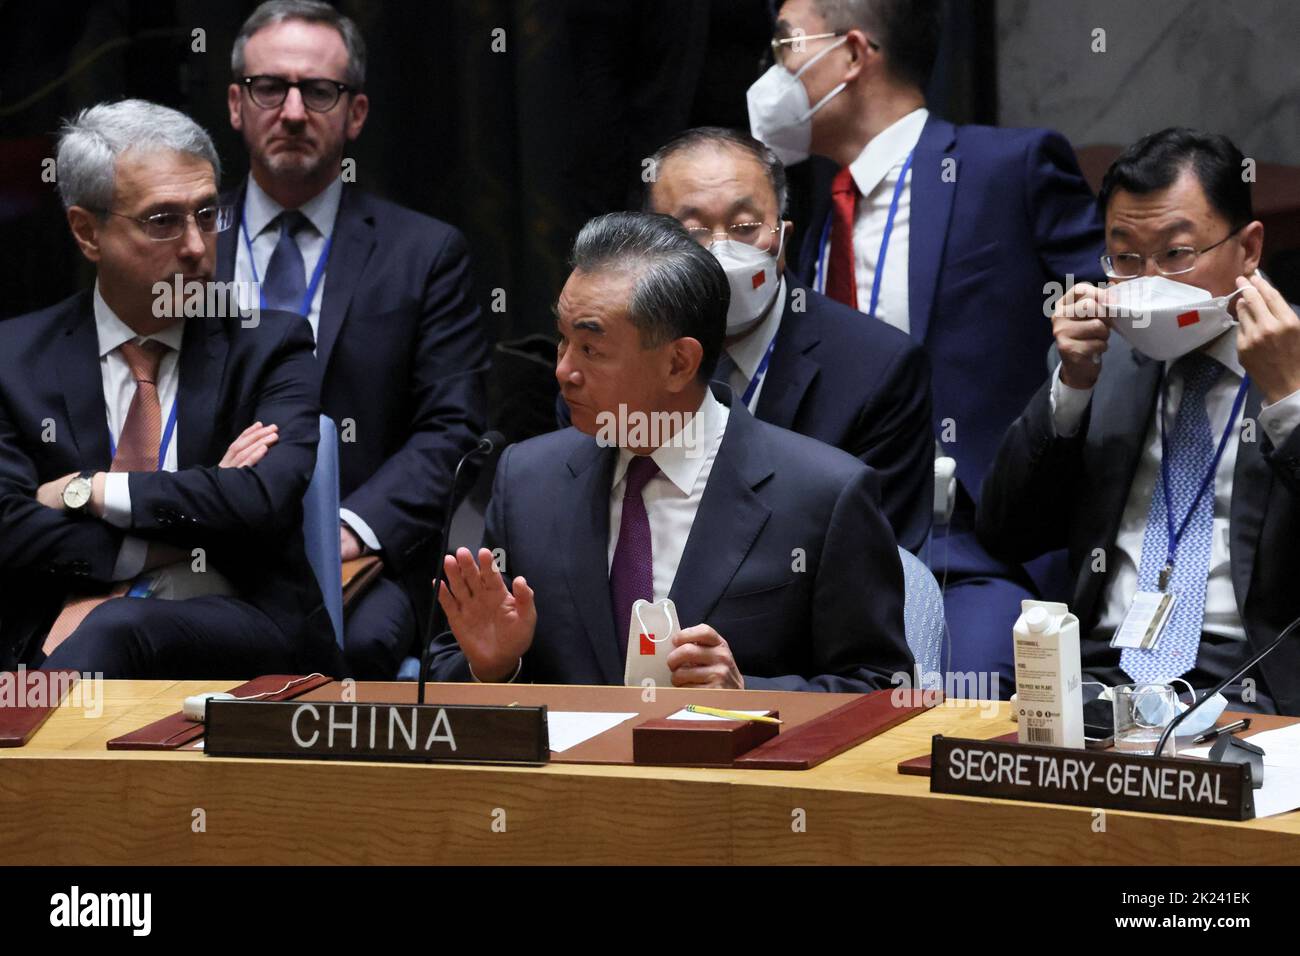 China's Foreign Minister Wang Yi attends a high level meeting of the United Nations Security Council on the situation amid Russia's invasion of Ukraine, at the 77th Session of the United Nations General Assembly at U.N. Headquarters in New York City, U.S., September 22, 2022. REUTERS/Brendan McDermid Stock Photo